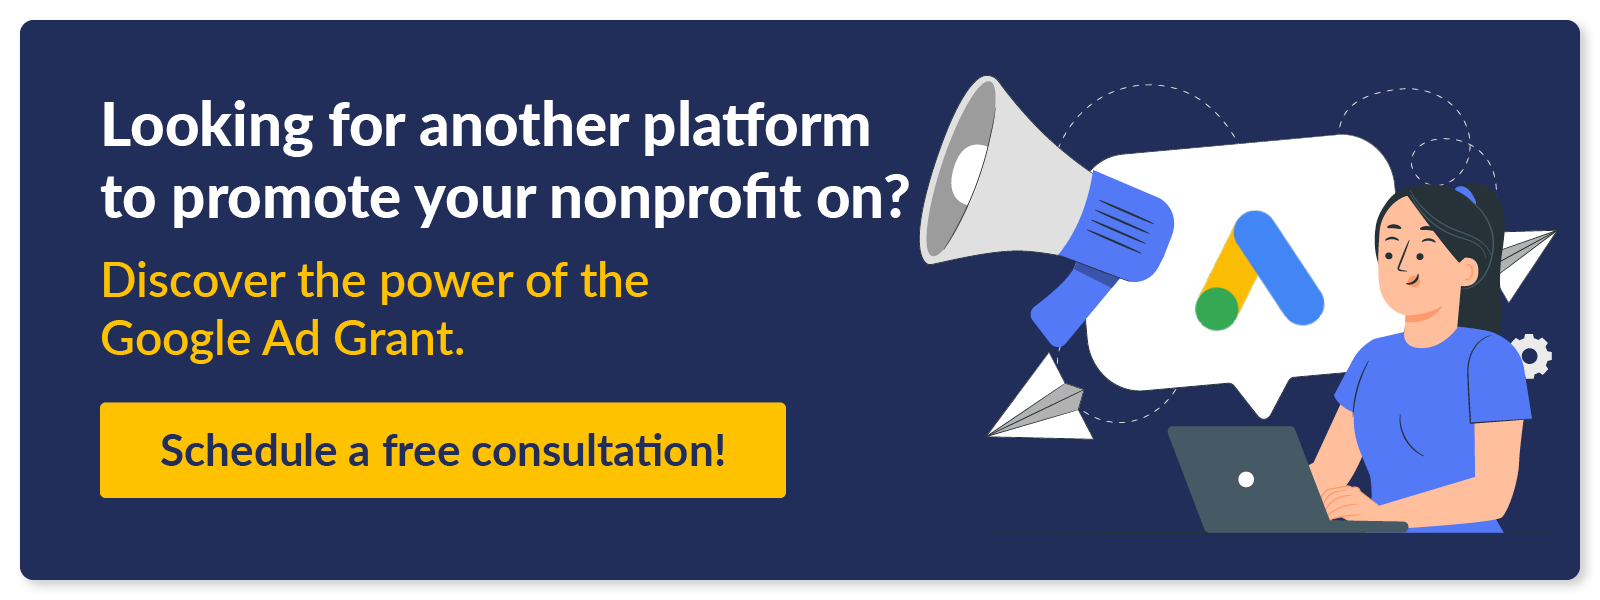 Looking for another platform to promote your nonprofit on? Discover the power of the Google Ad Grant. Schedule a free consultation! 